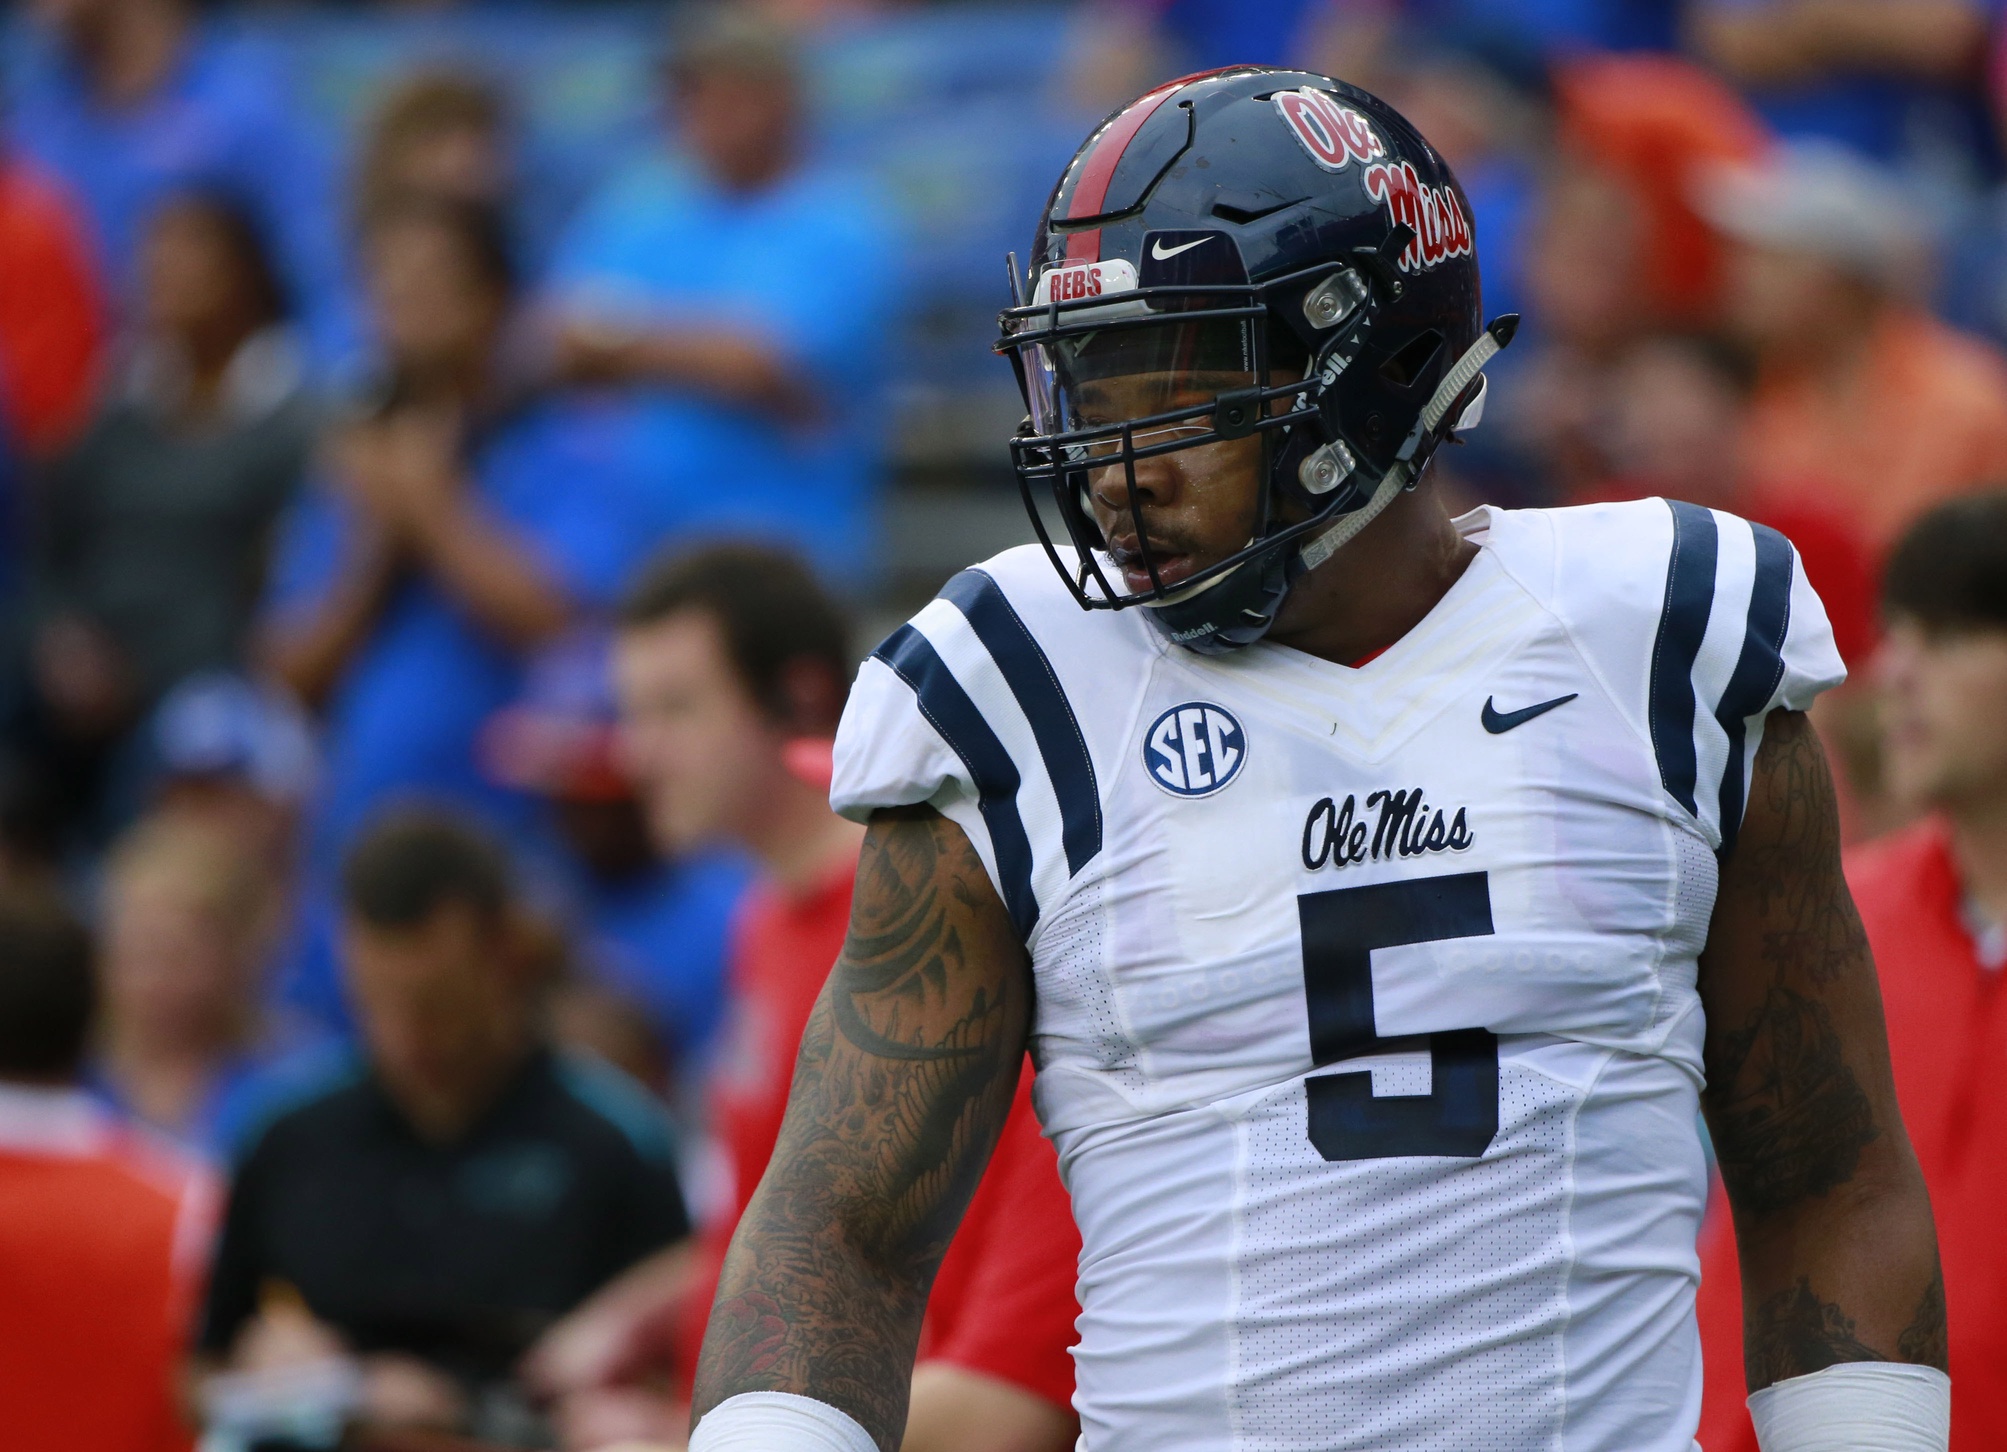 Oct 3, 2015; Gainesville, FL, USA; Mississippi Rebels defensive tackle Robert Nkemdiche (5) looks on prior to the game at Ben Hill Griffin Stadium. Mandatory Credit: Kim Klement-USA TODAY Sports